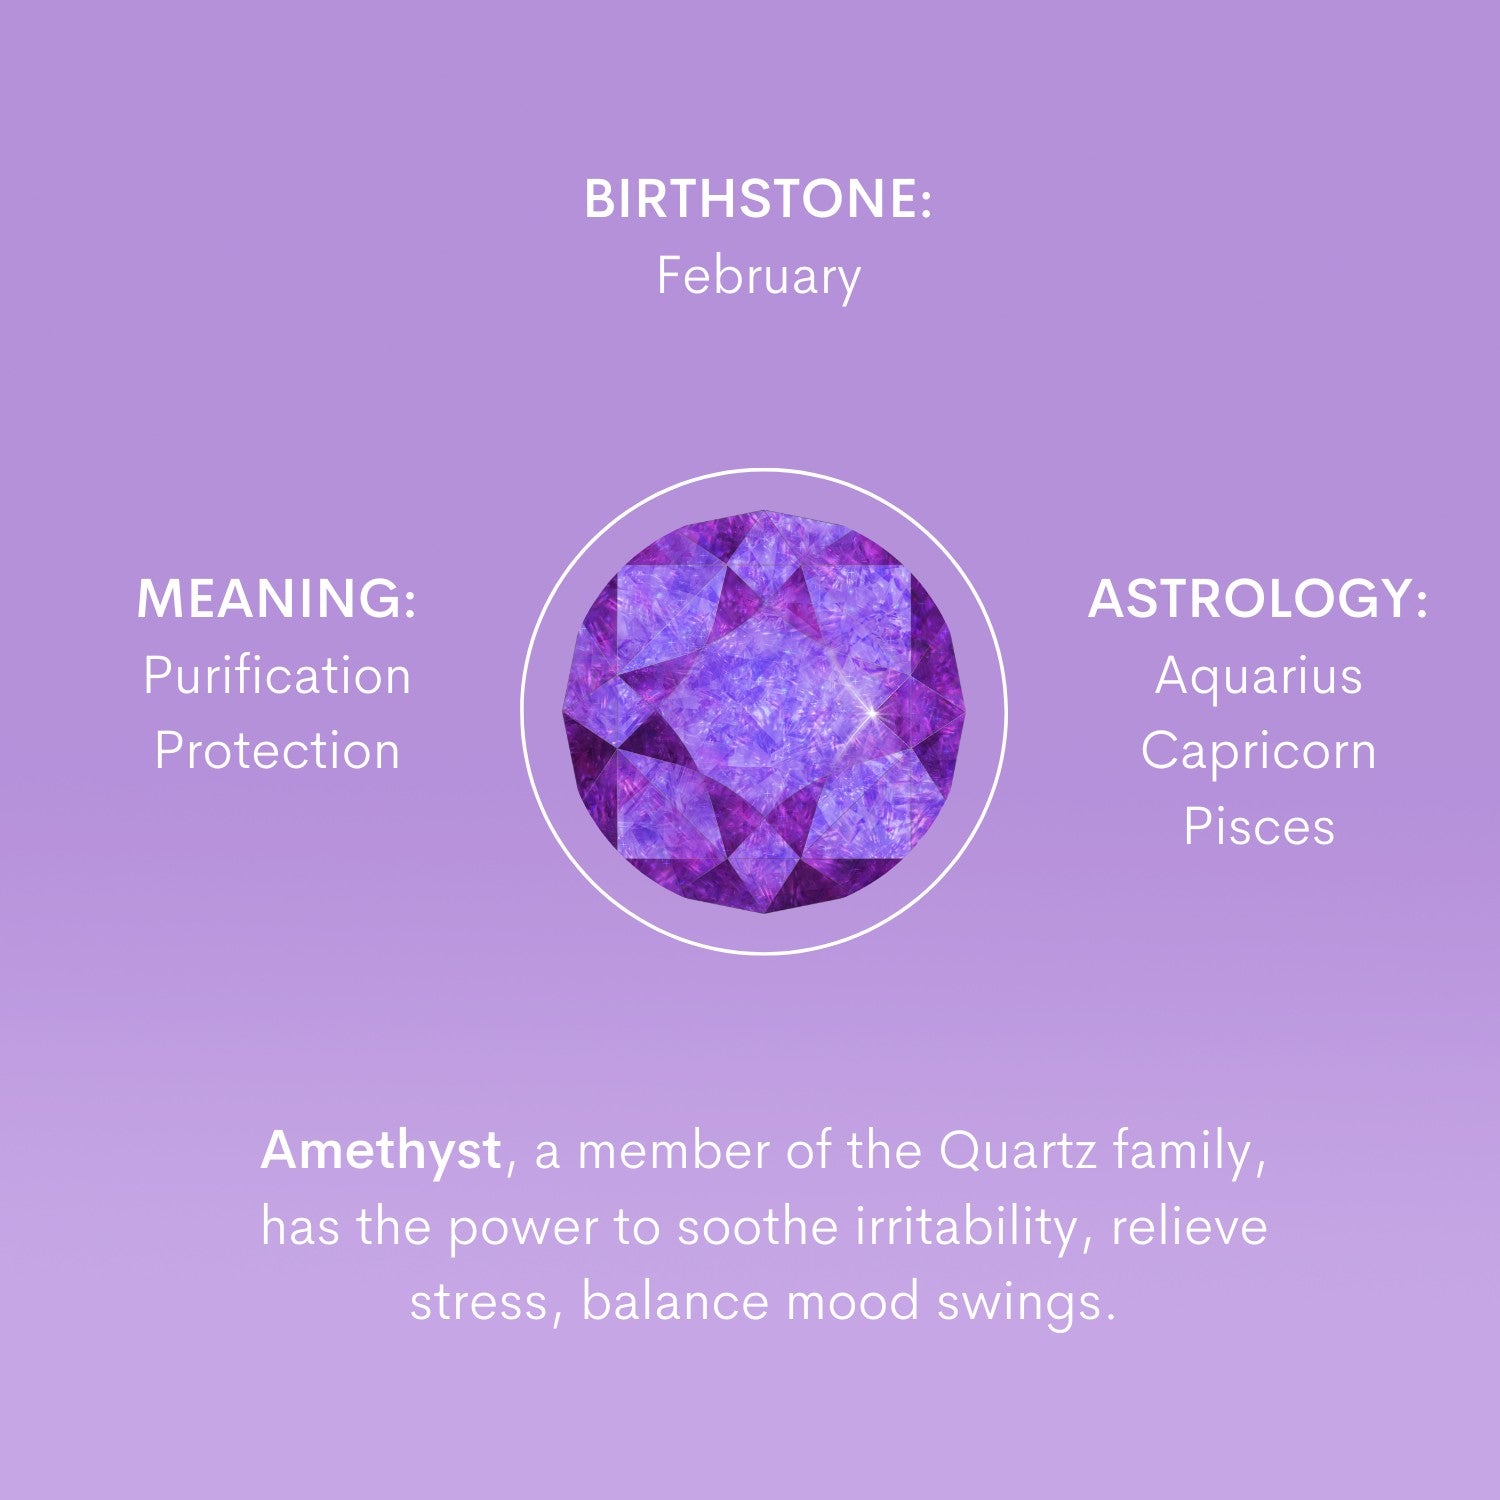 Amethyst, a member of the Quartz family, has the power to soothe irritability, relieve stress, balance mood swings.